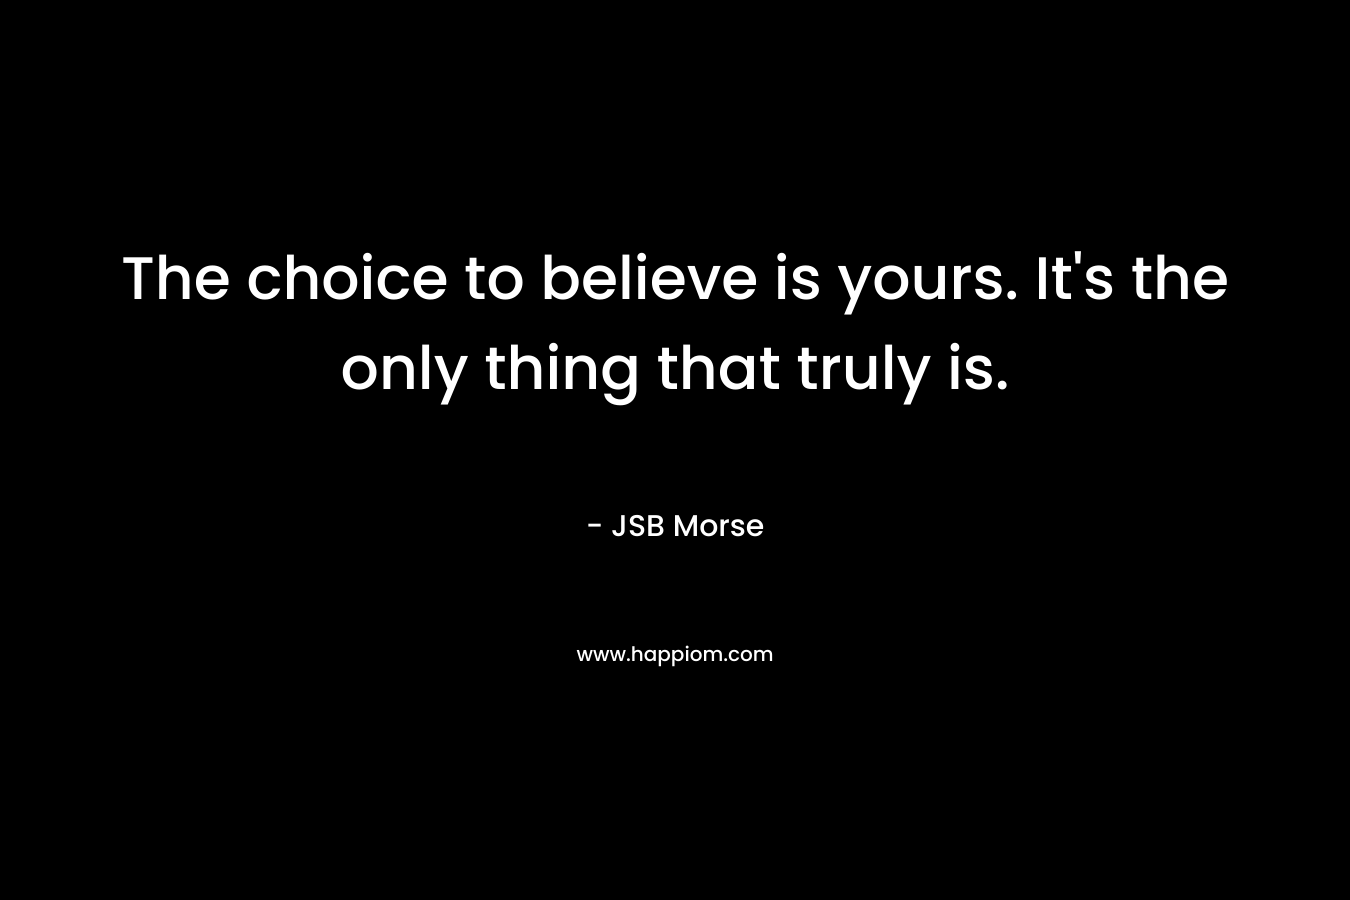 The choice to believe is yours. It's the only thing that truly is.